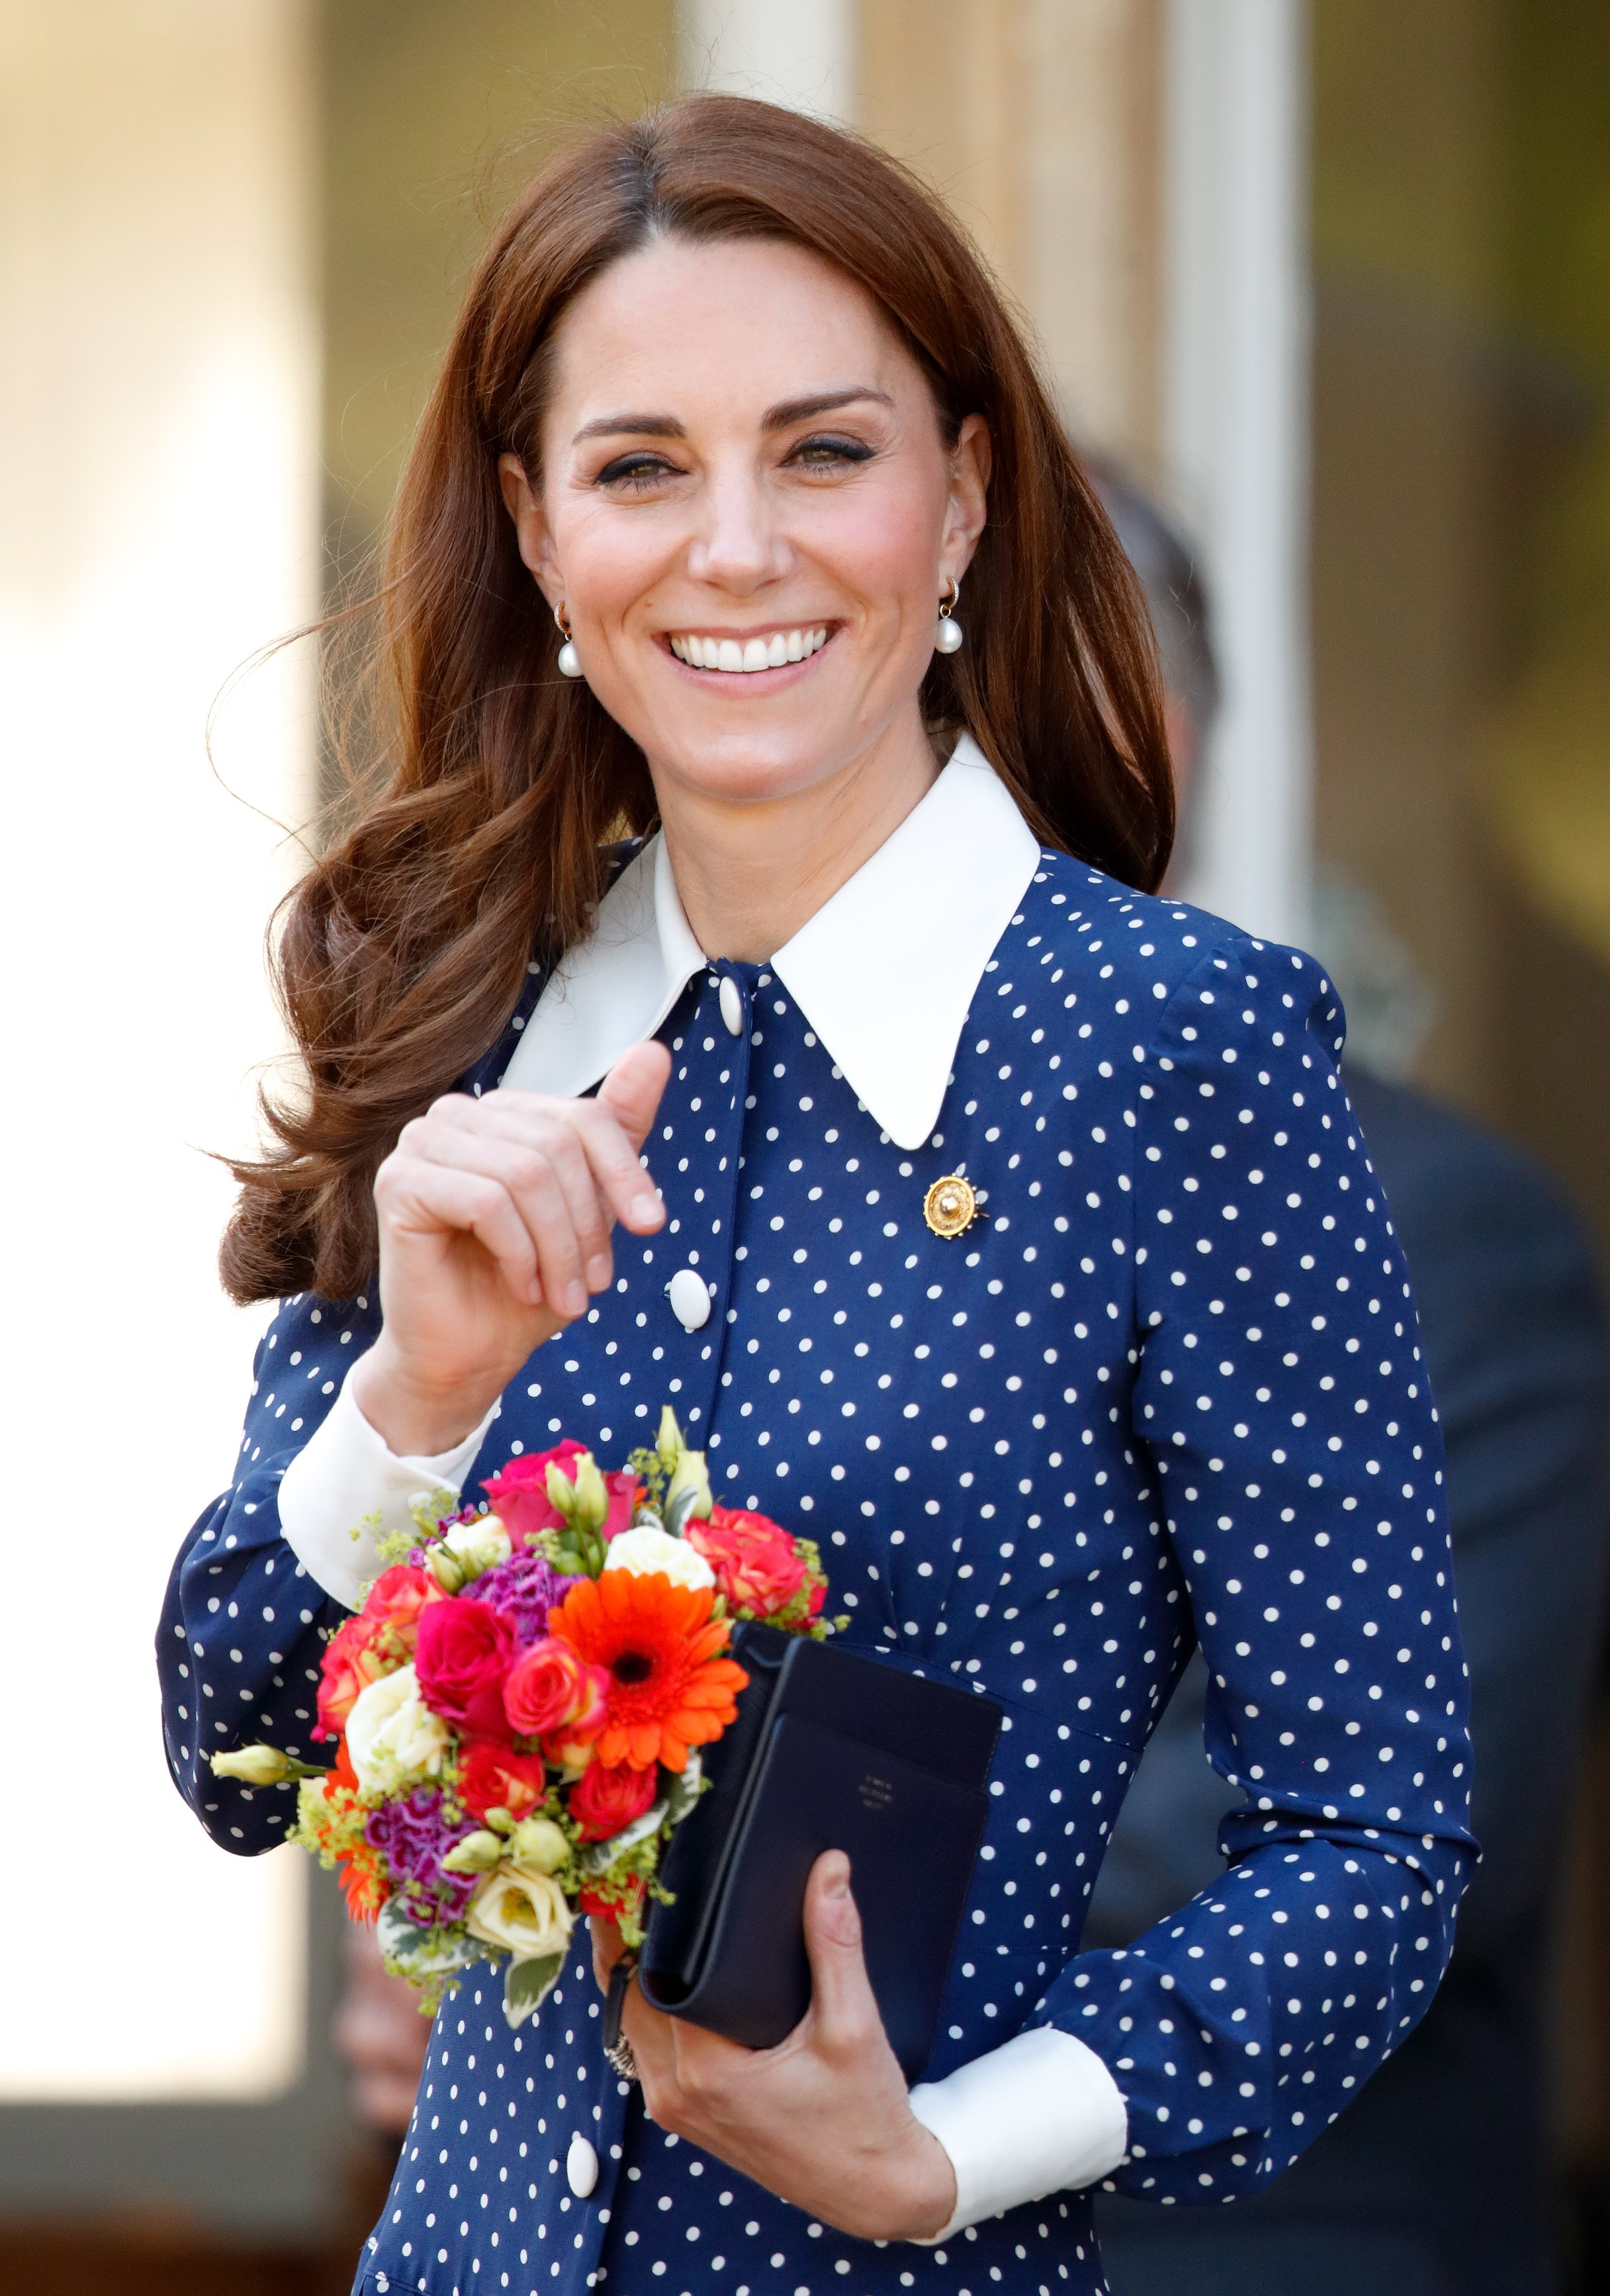 Kate Middleton attends D-Day in Bletchly Park on May 14, 2019 | Photo: Getty Images